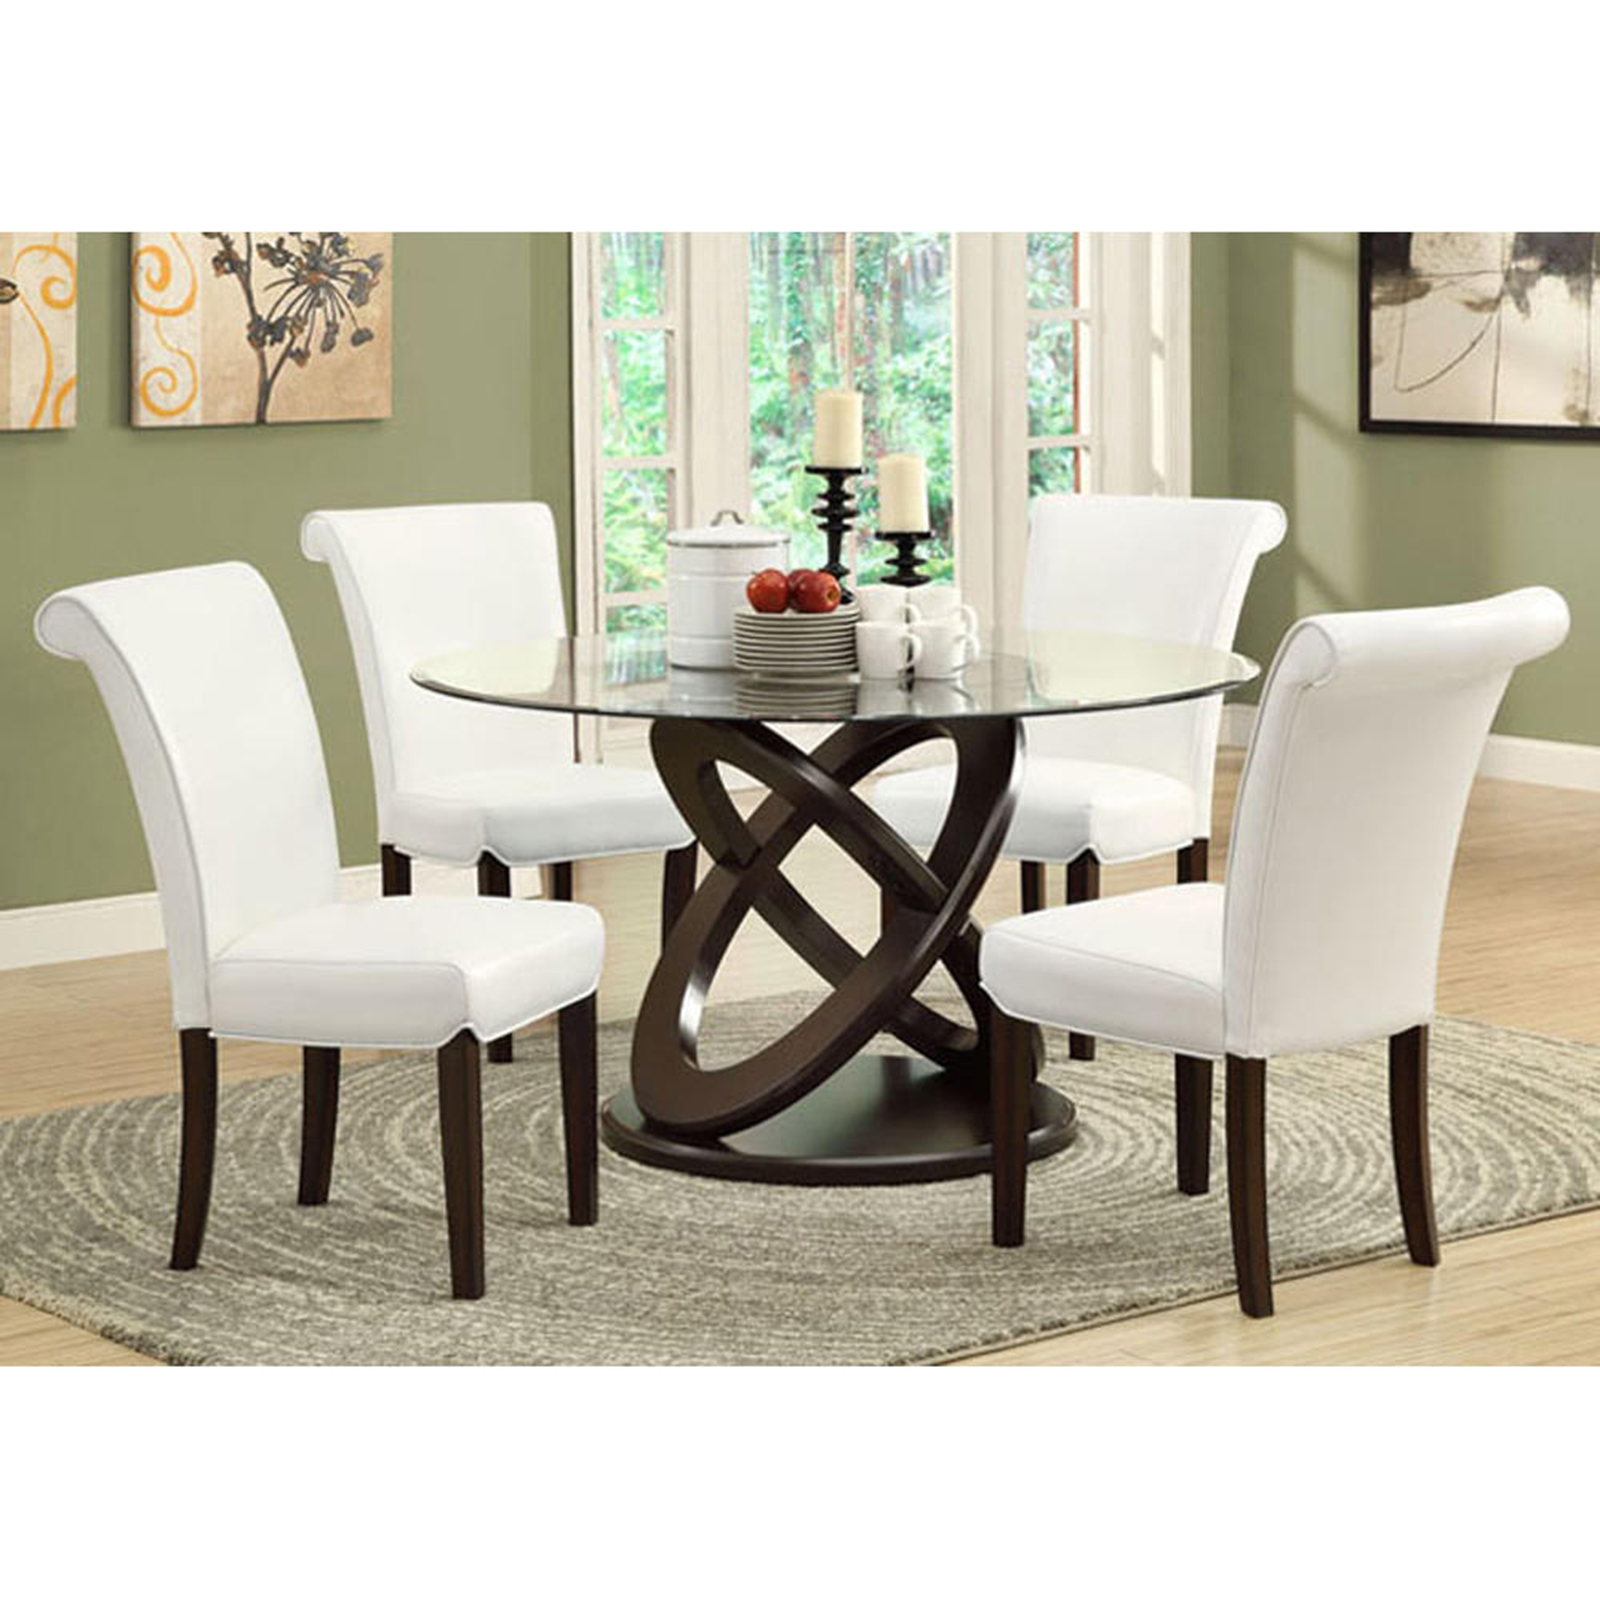 Monarch Specialties Olympic Ring-Style Round Dining Table with Tempered Glass - Dark Espresso